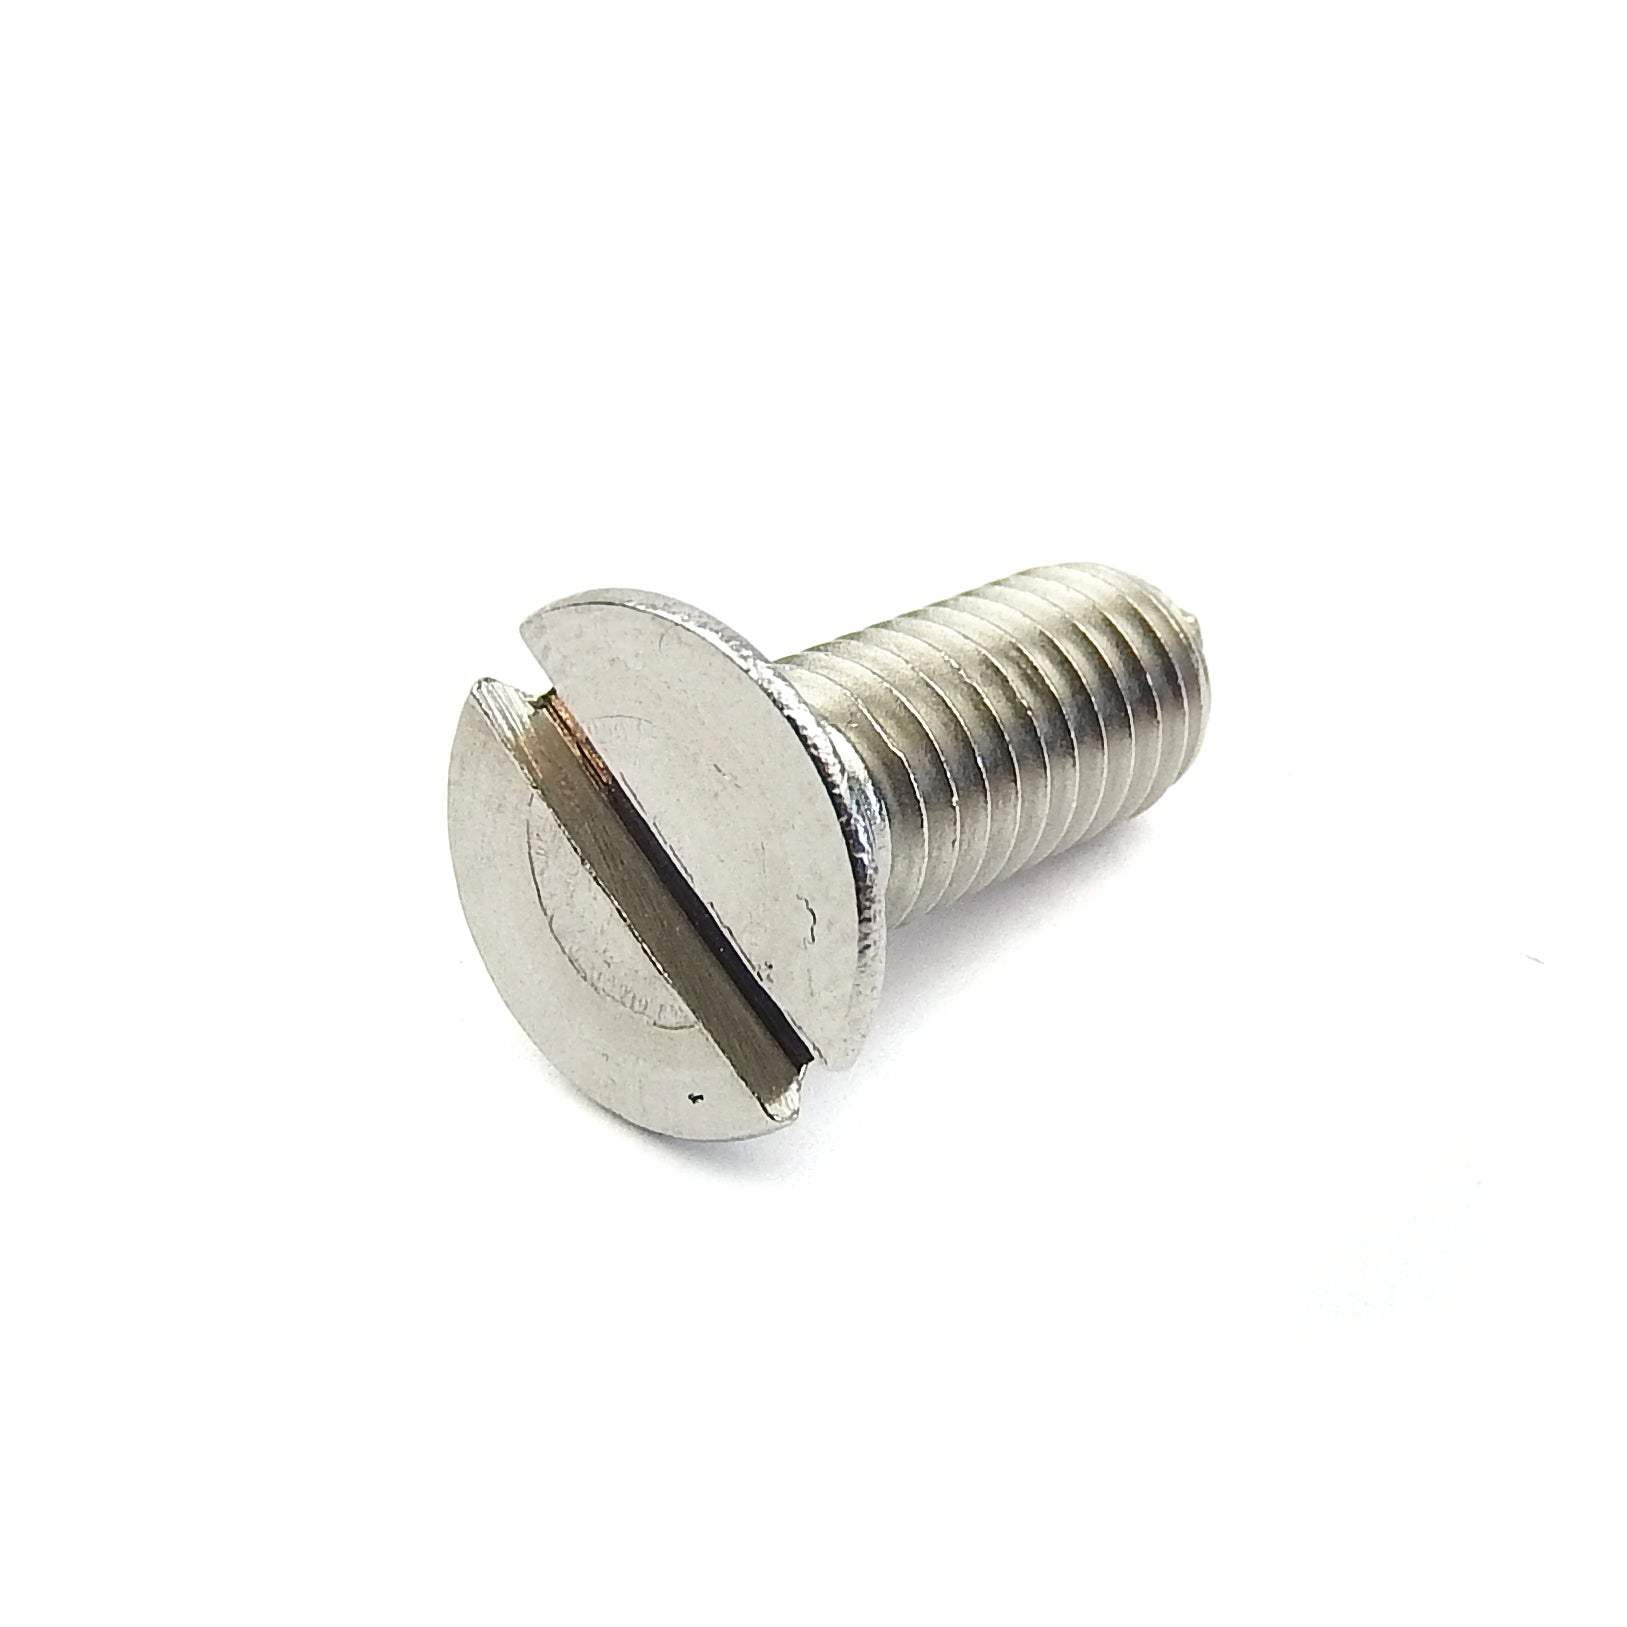 Counter Sunk Flat Screw M6 x 16mm in Stainless